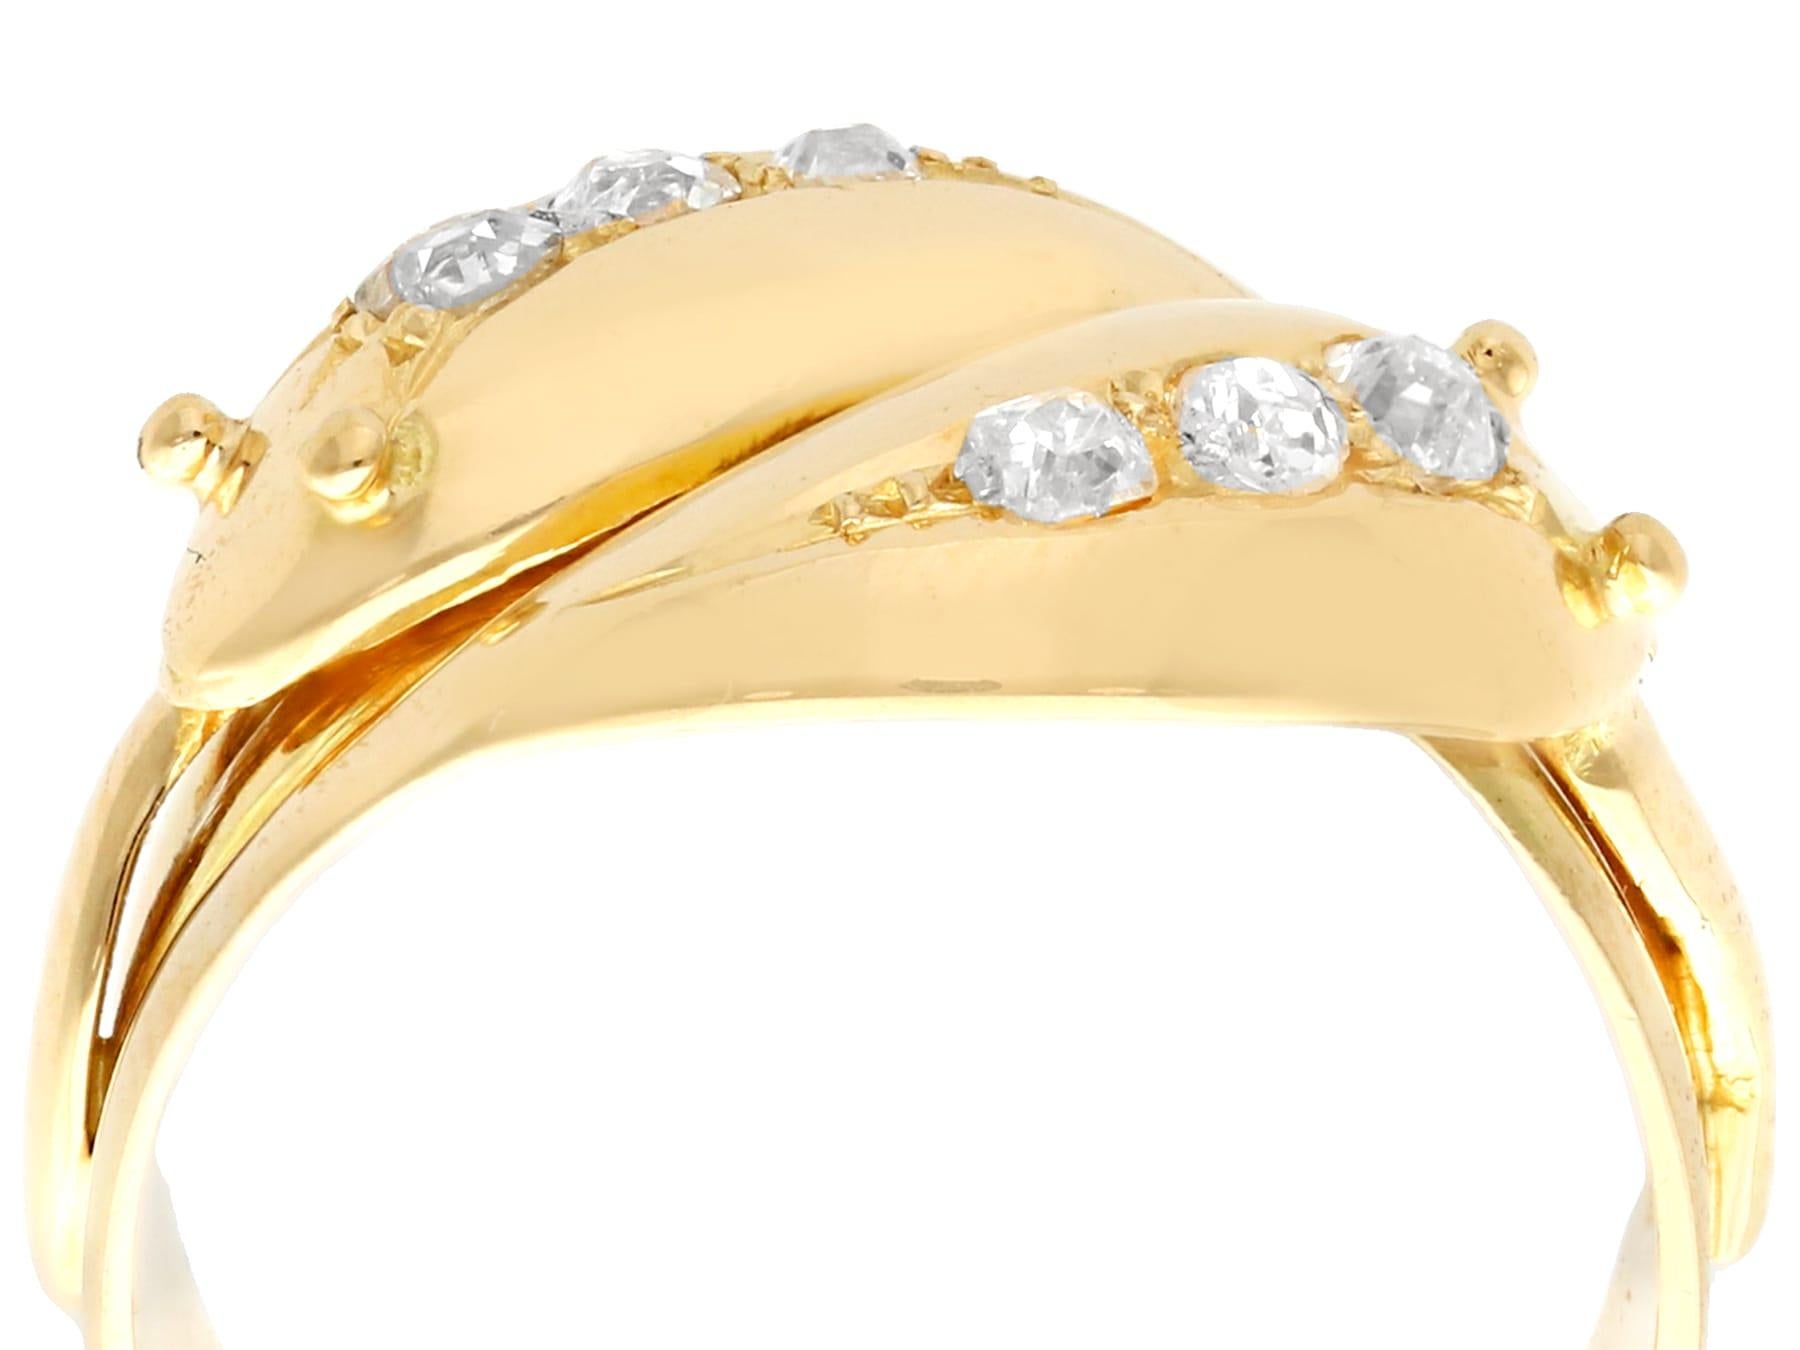 A fine and impressive, unusual antique George V, English 0.54 carat diamond, 18k yellow gold snake ring; part of our diverse antique jewelry and estate jewelry collections.

This antique George V dress ring has been crafted in 18k yellow gold.

This